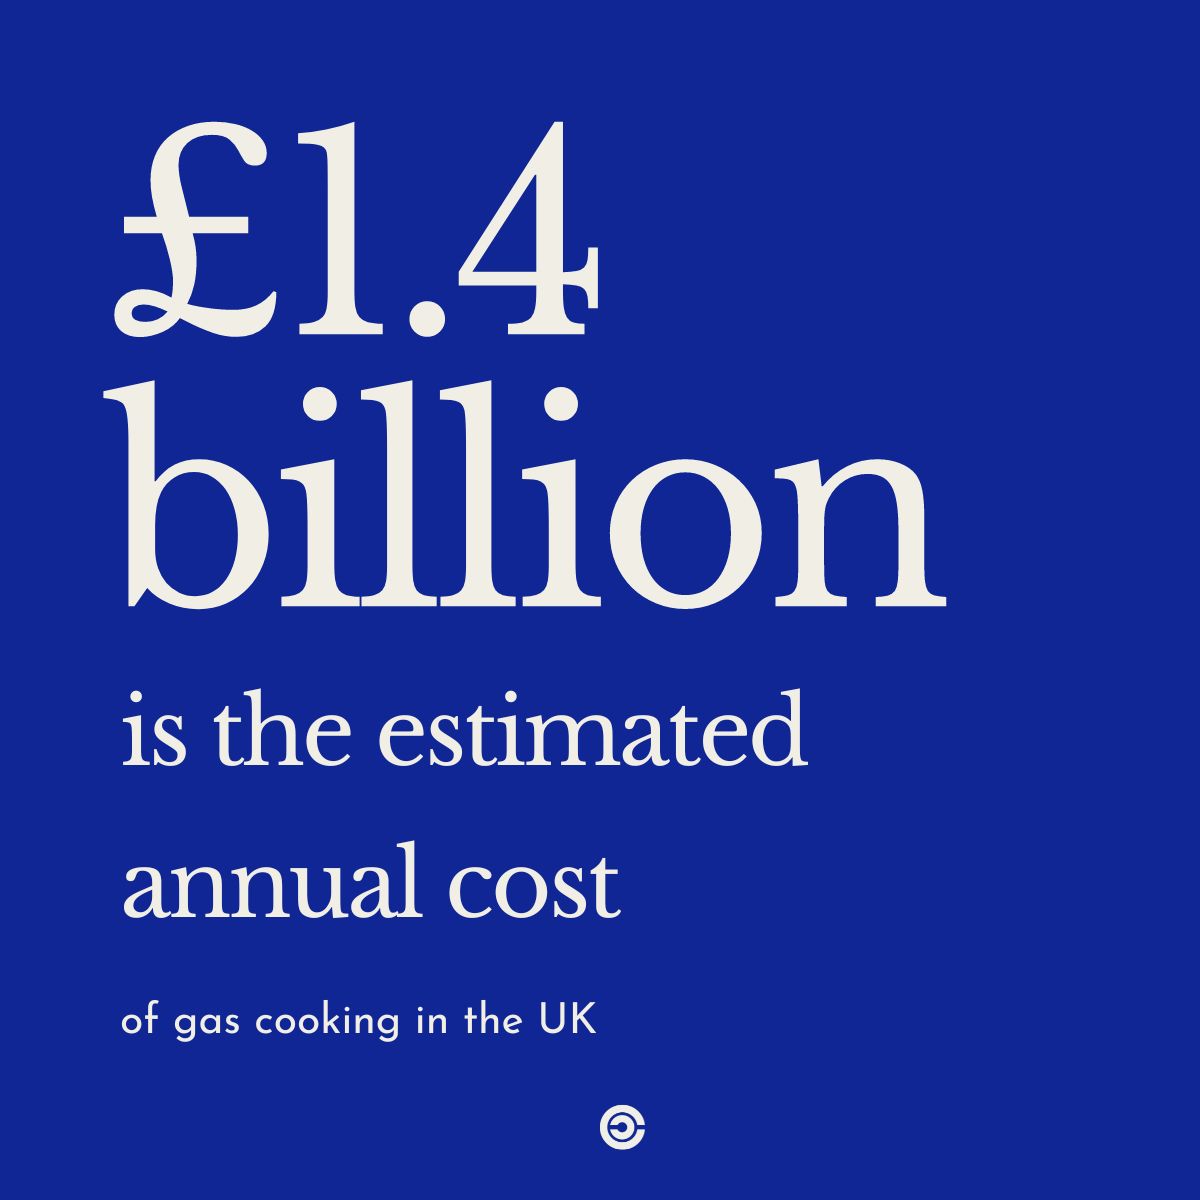 What are the real costs of gas cooking? Our member organisation @CLASPappliances estimates that indoor air pollution from gas cooking costs the UK around £1.4 billion annually. Read the UK factsheet for more information: clasp.ngo/wp-content/upl…